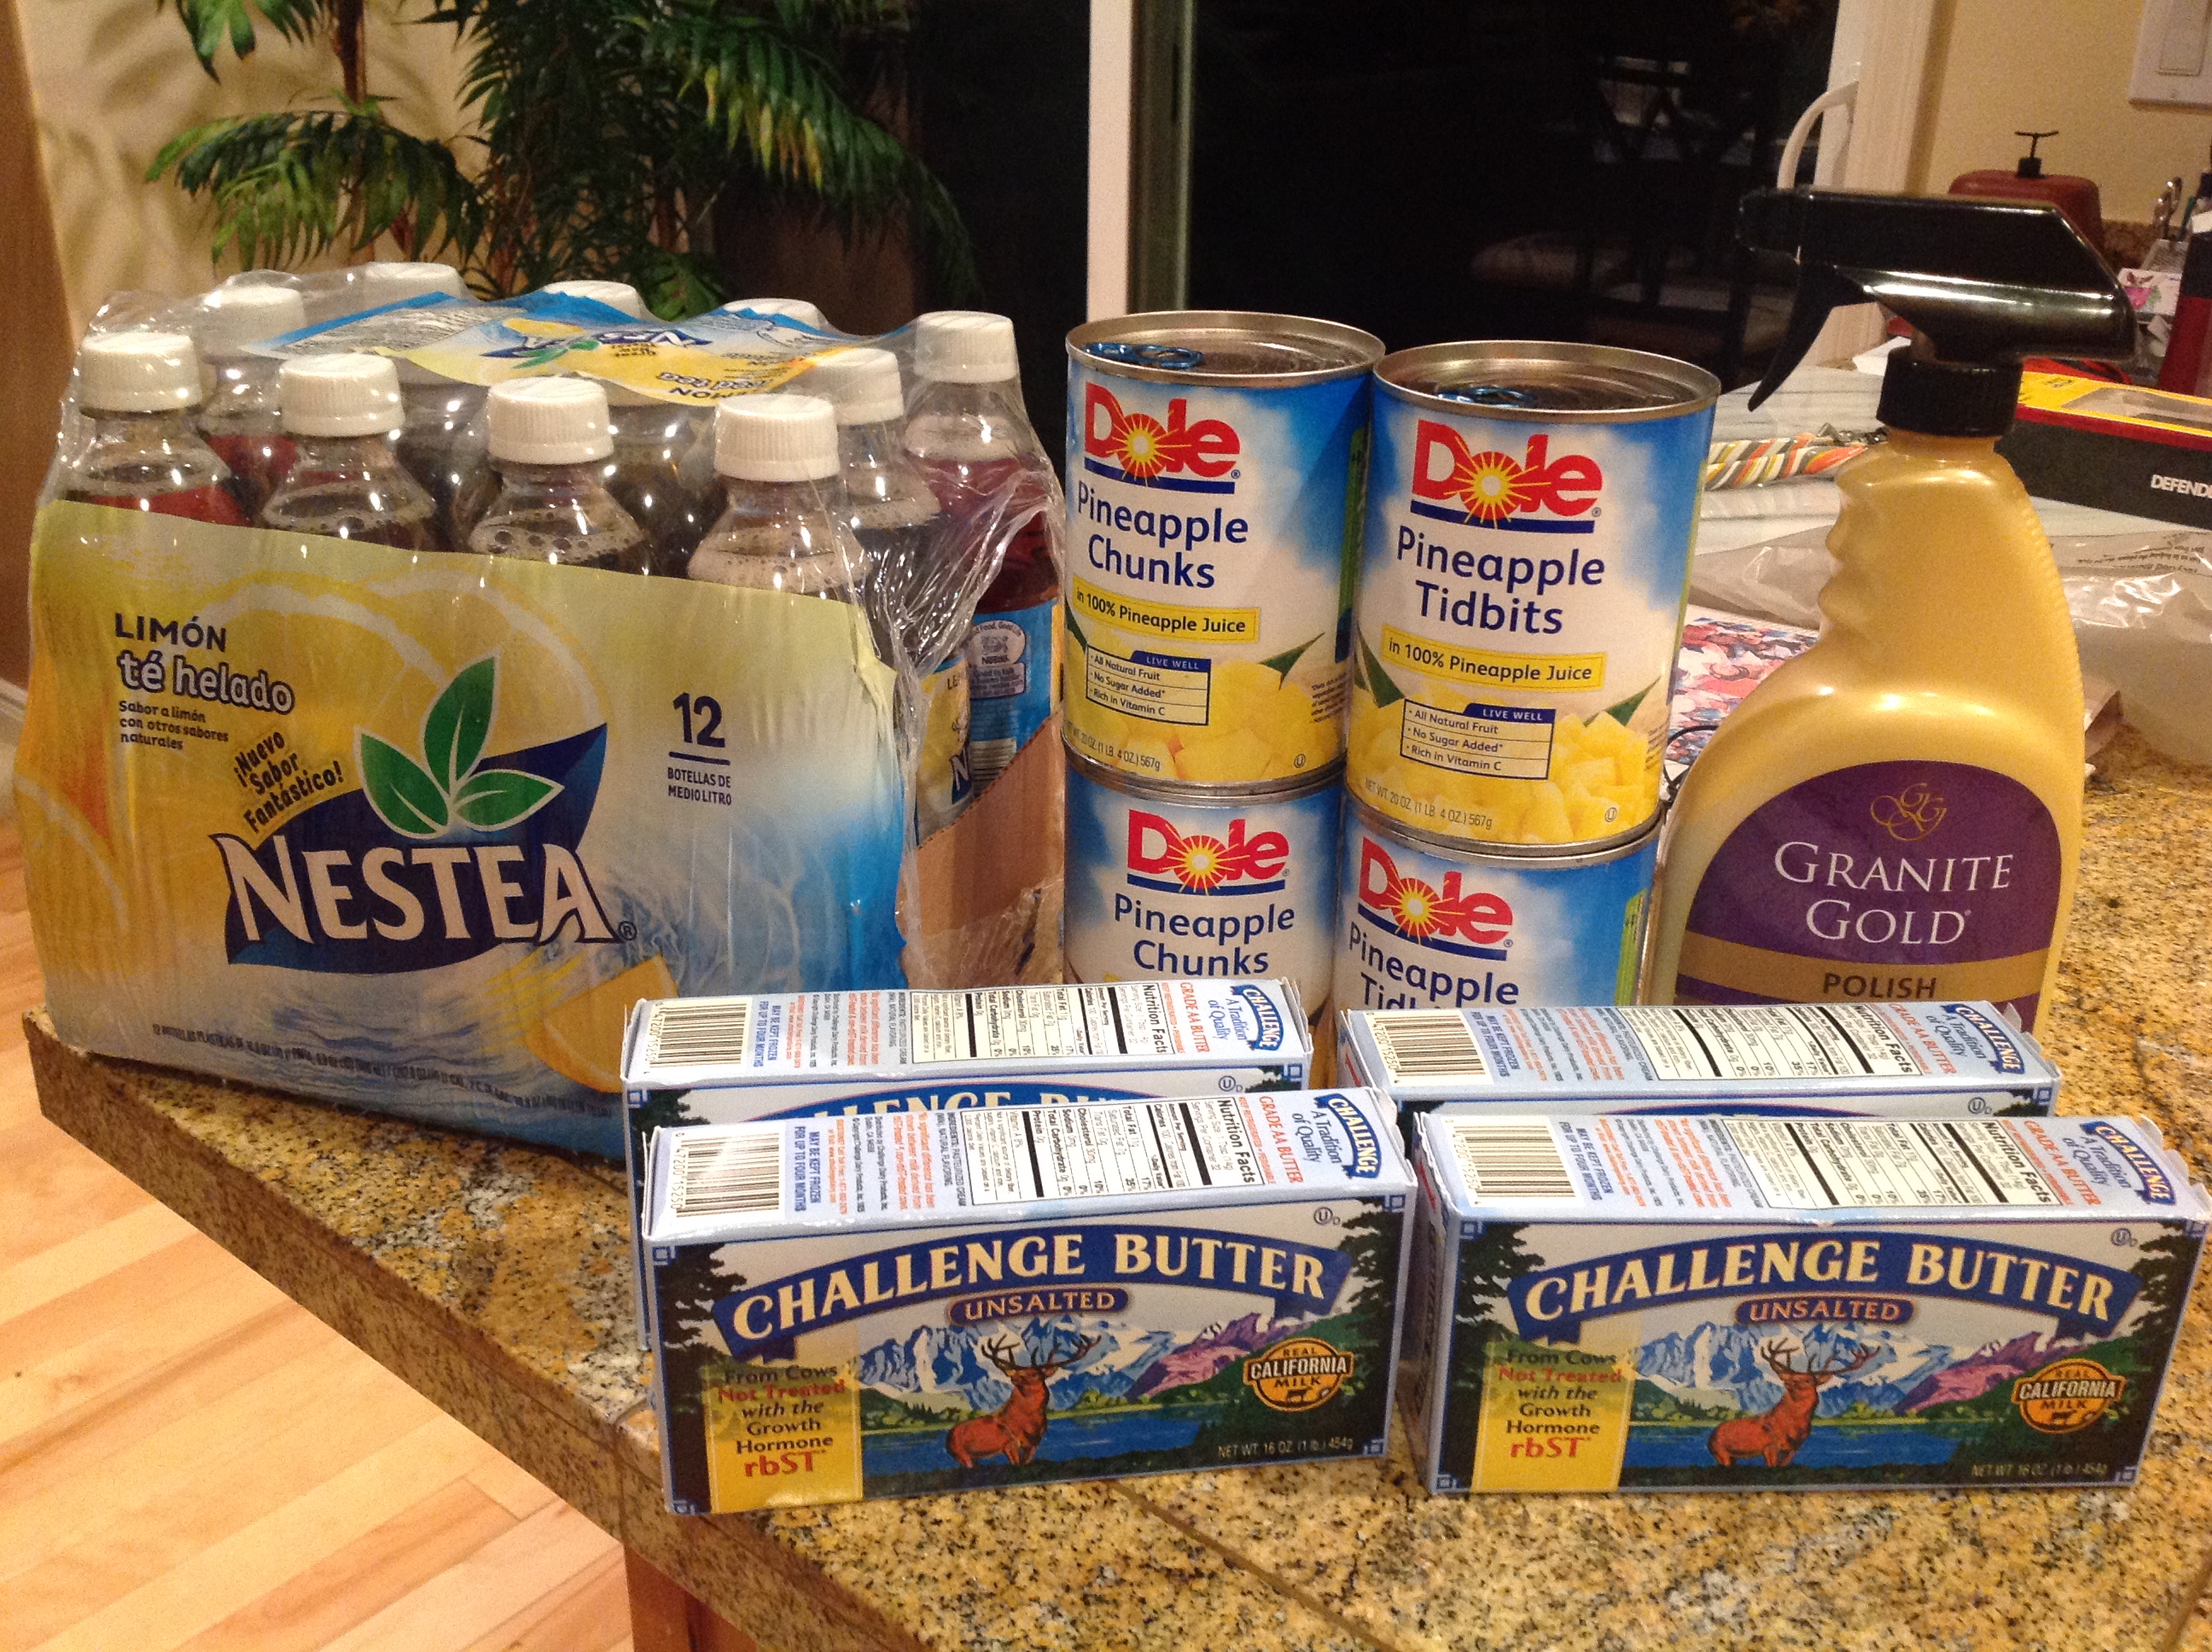 Fred Meyer: The Nestea drink was free (free friday deal). I stocked up on the butter too (after coupon i paid like 1.50$ each,normally its $4 each)I paid $11